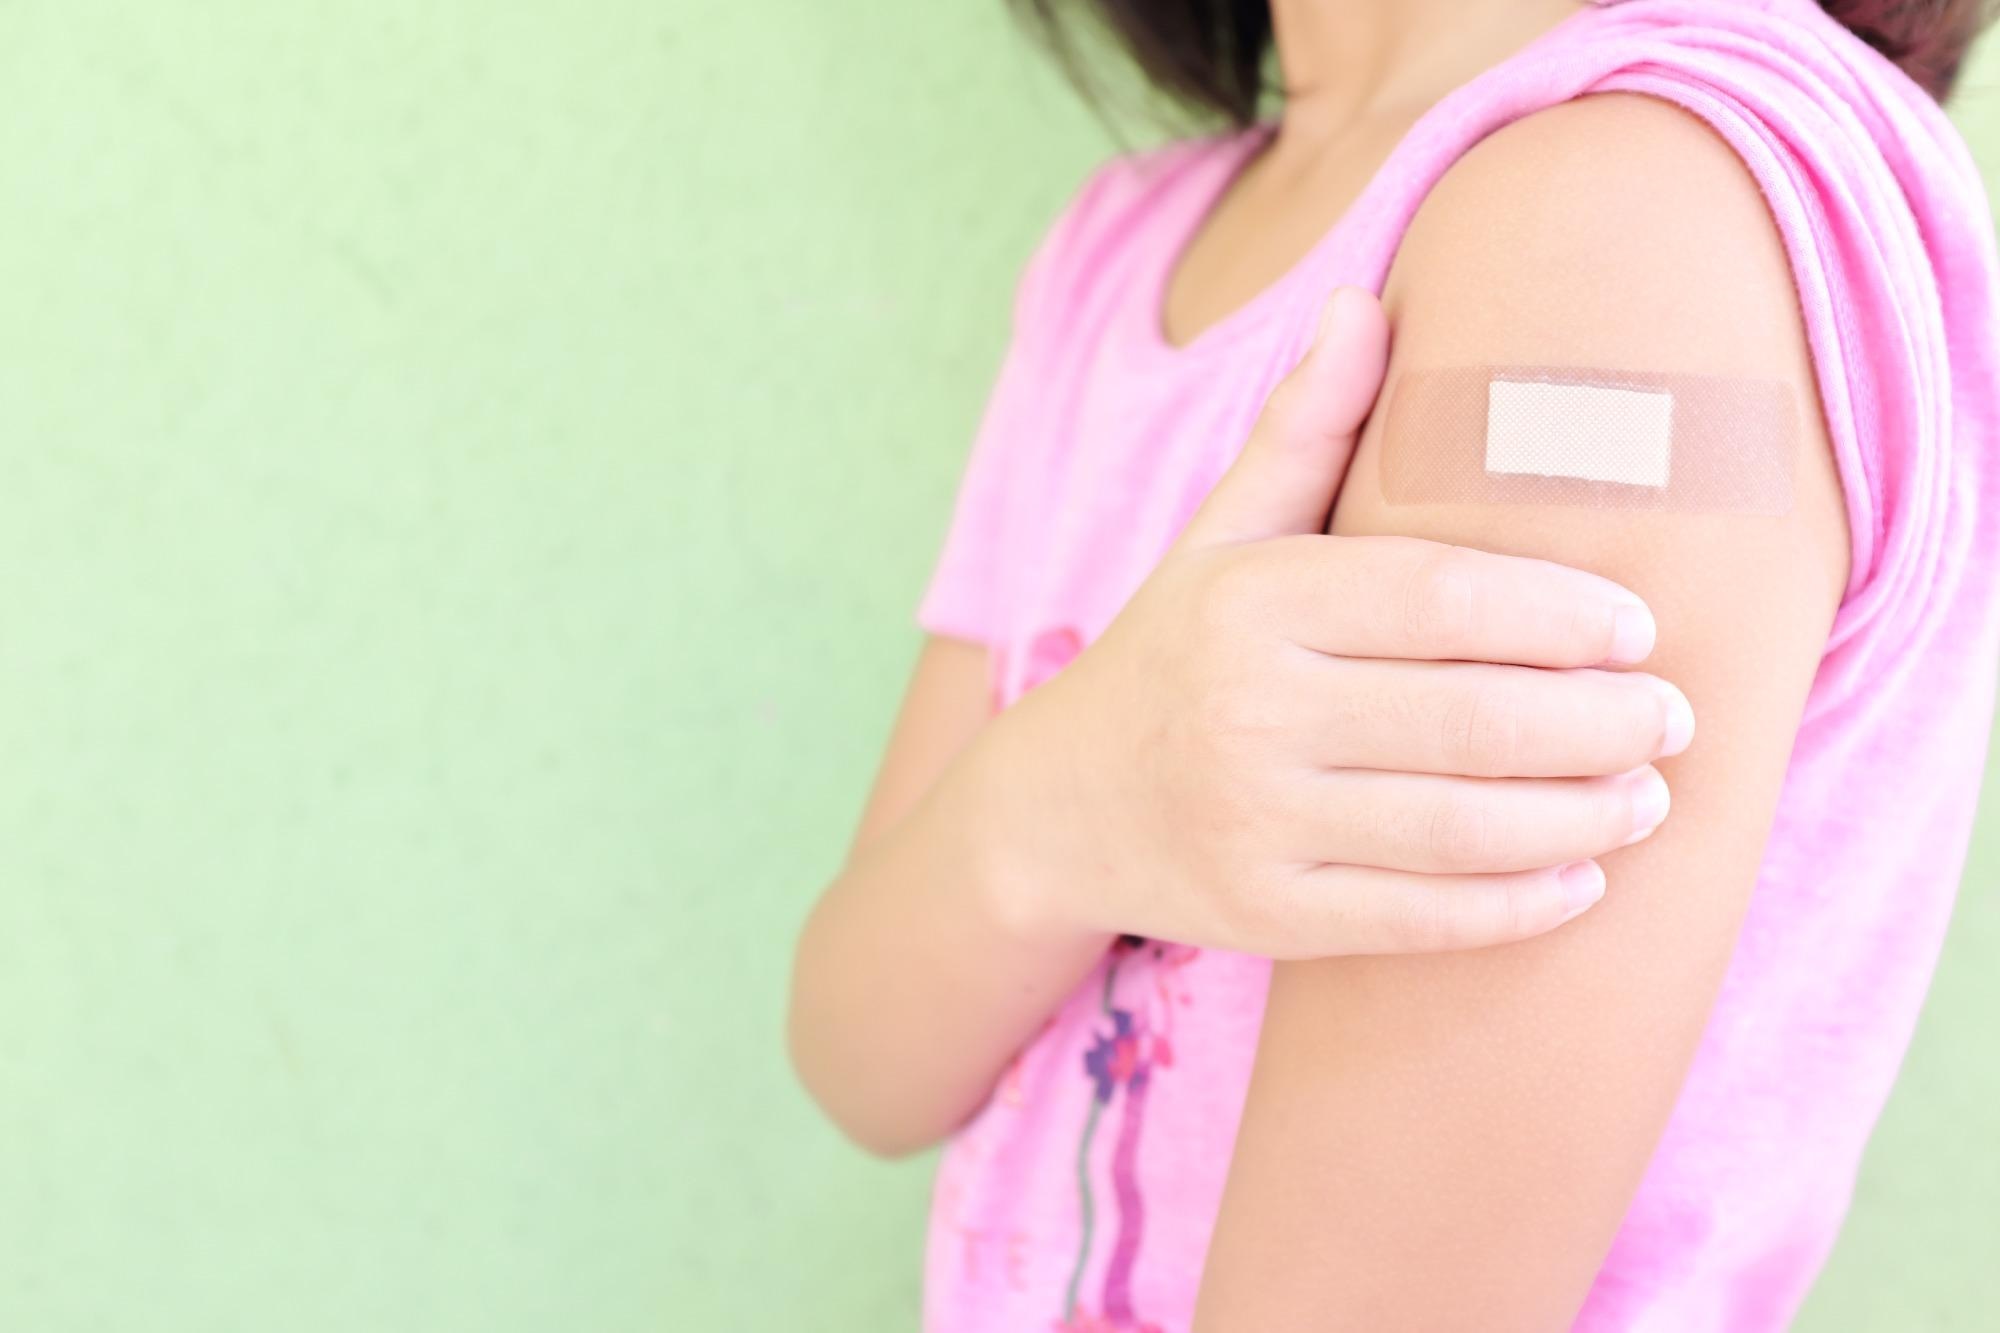 Study: Personal risk or societal benefit? Investigating adults’ support for COVID-19 childhood vaccination. Image Credit: Sulit Photos / Shutterstock